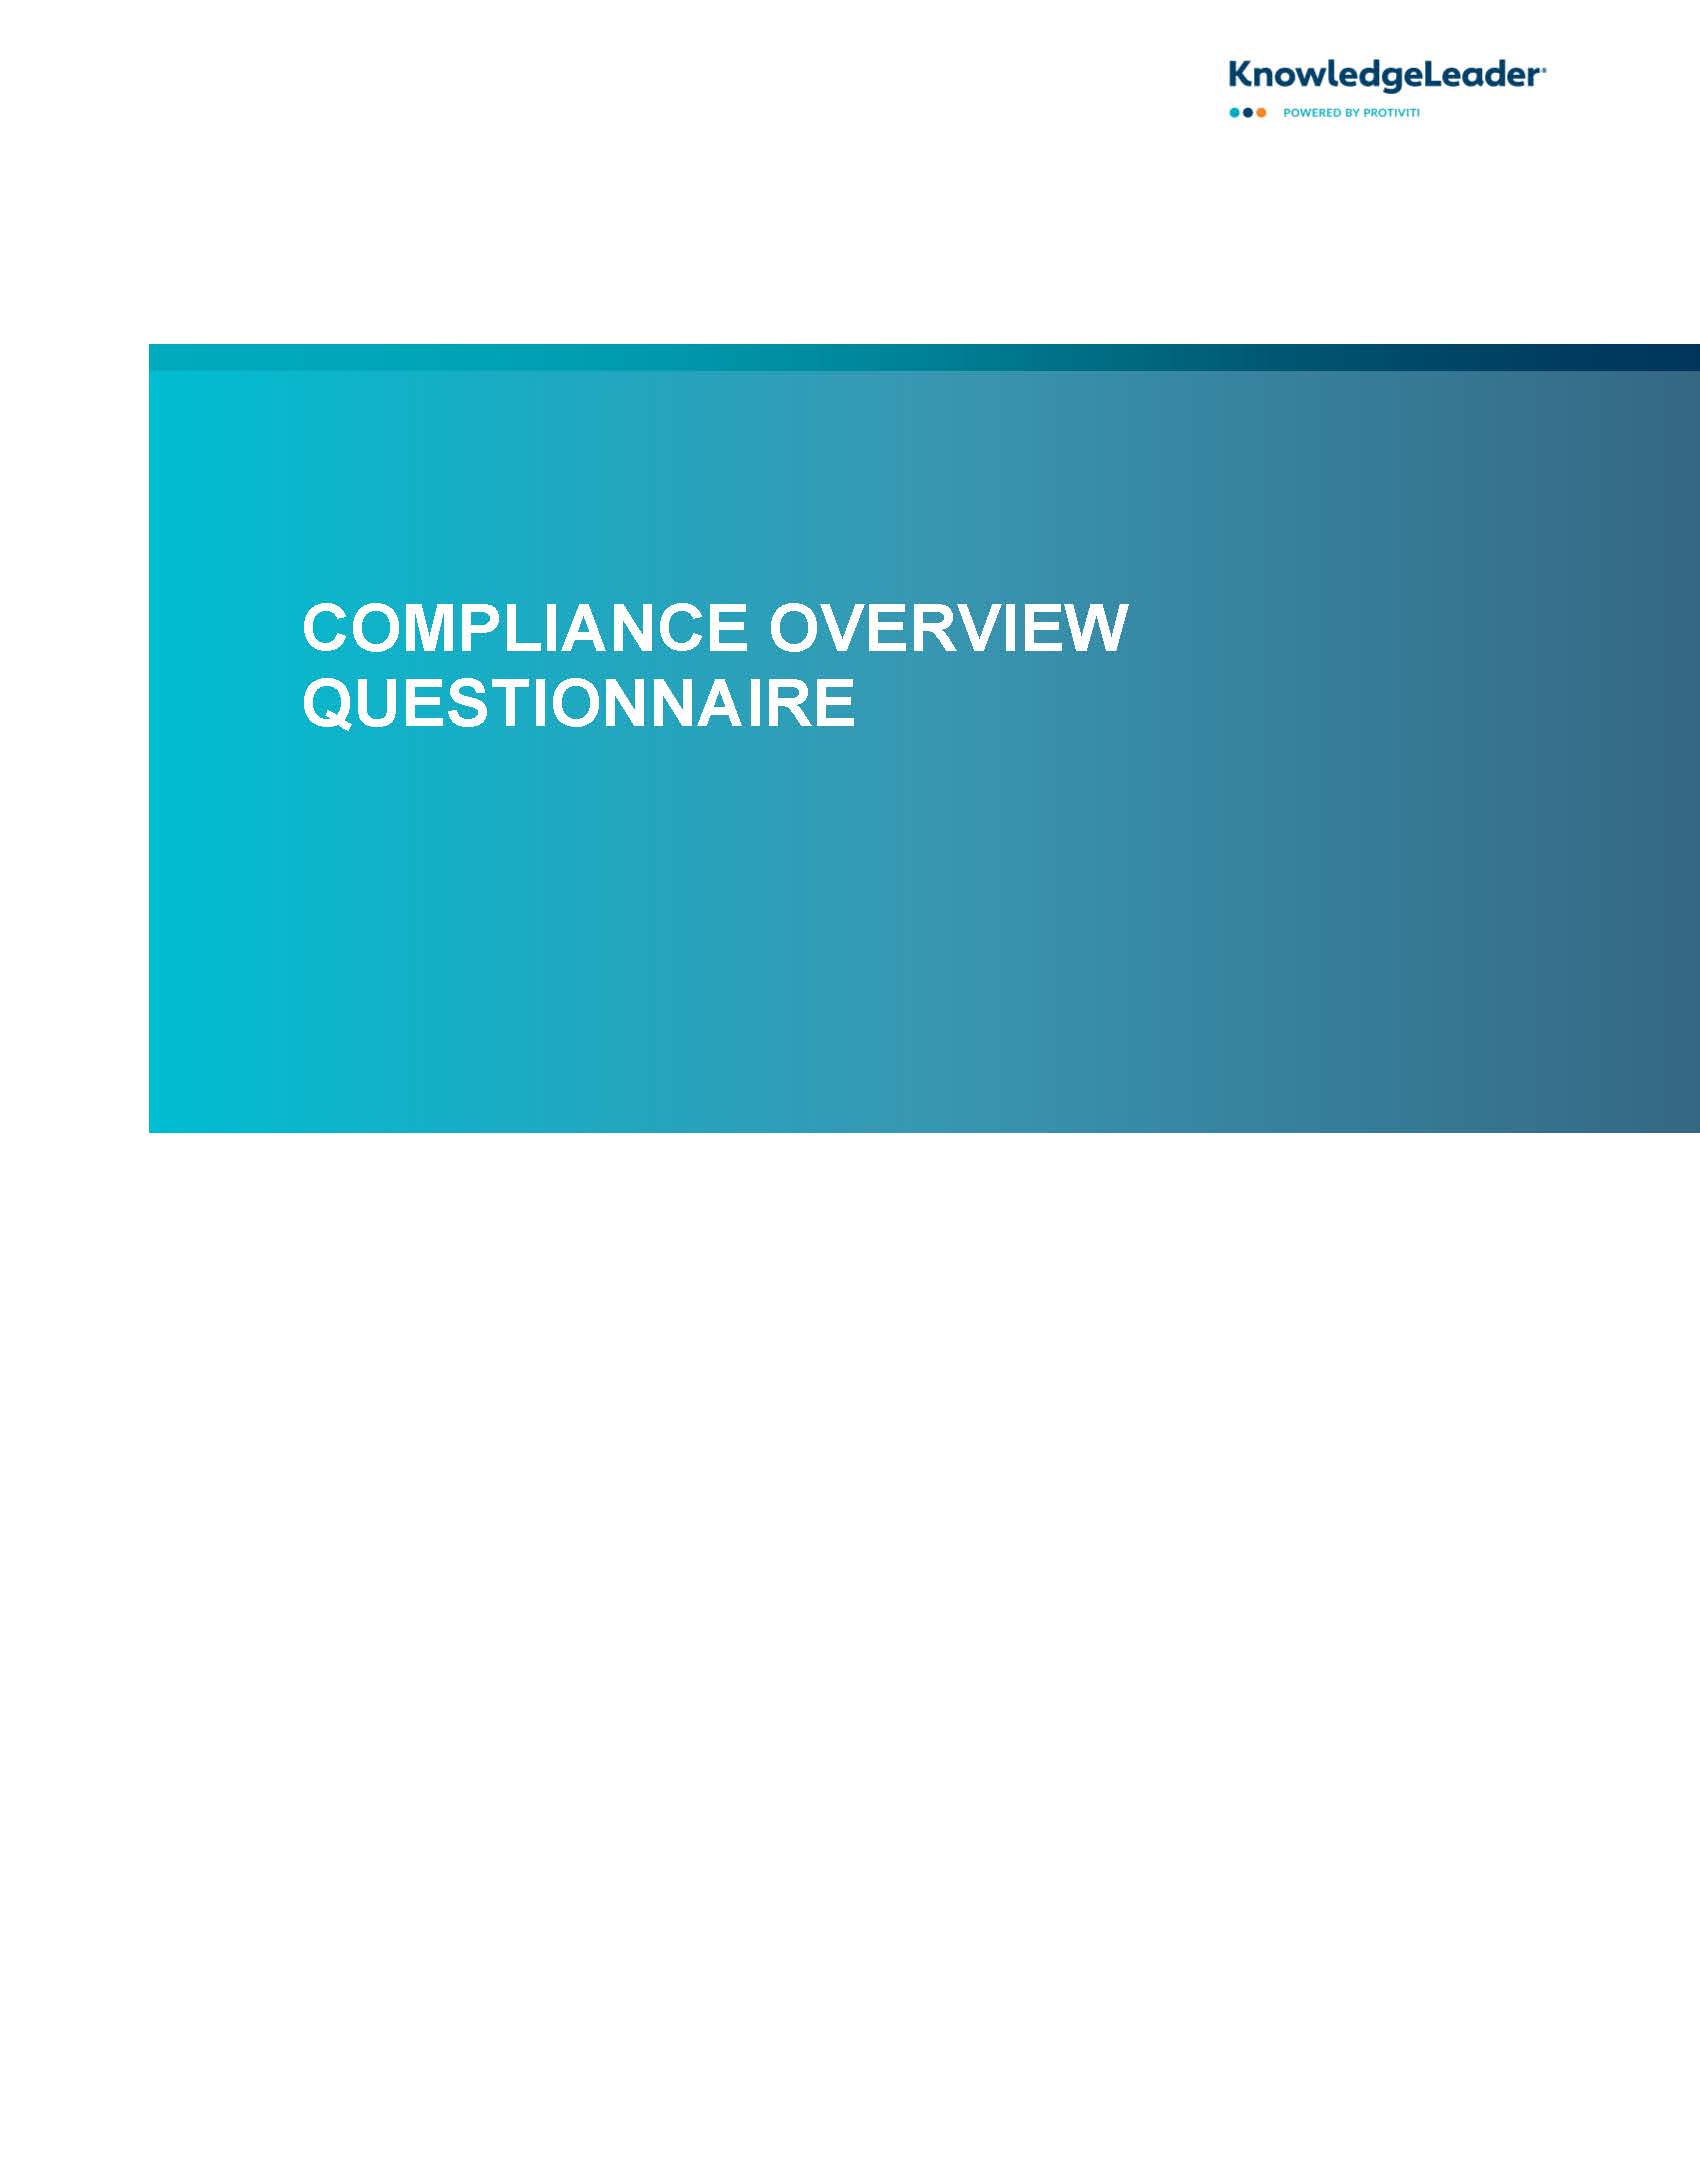 Screenshot of the first page of Compliance Overview Questionnaire